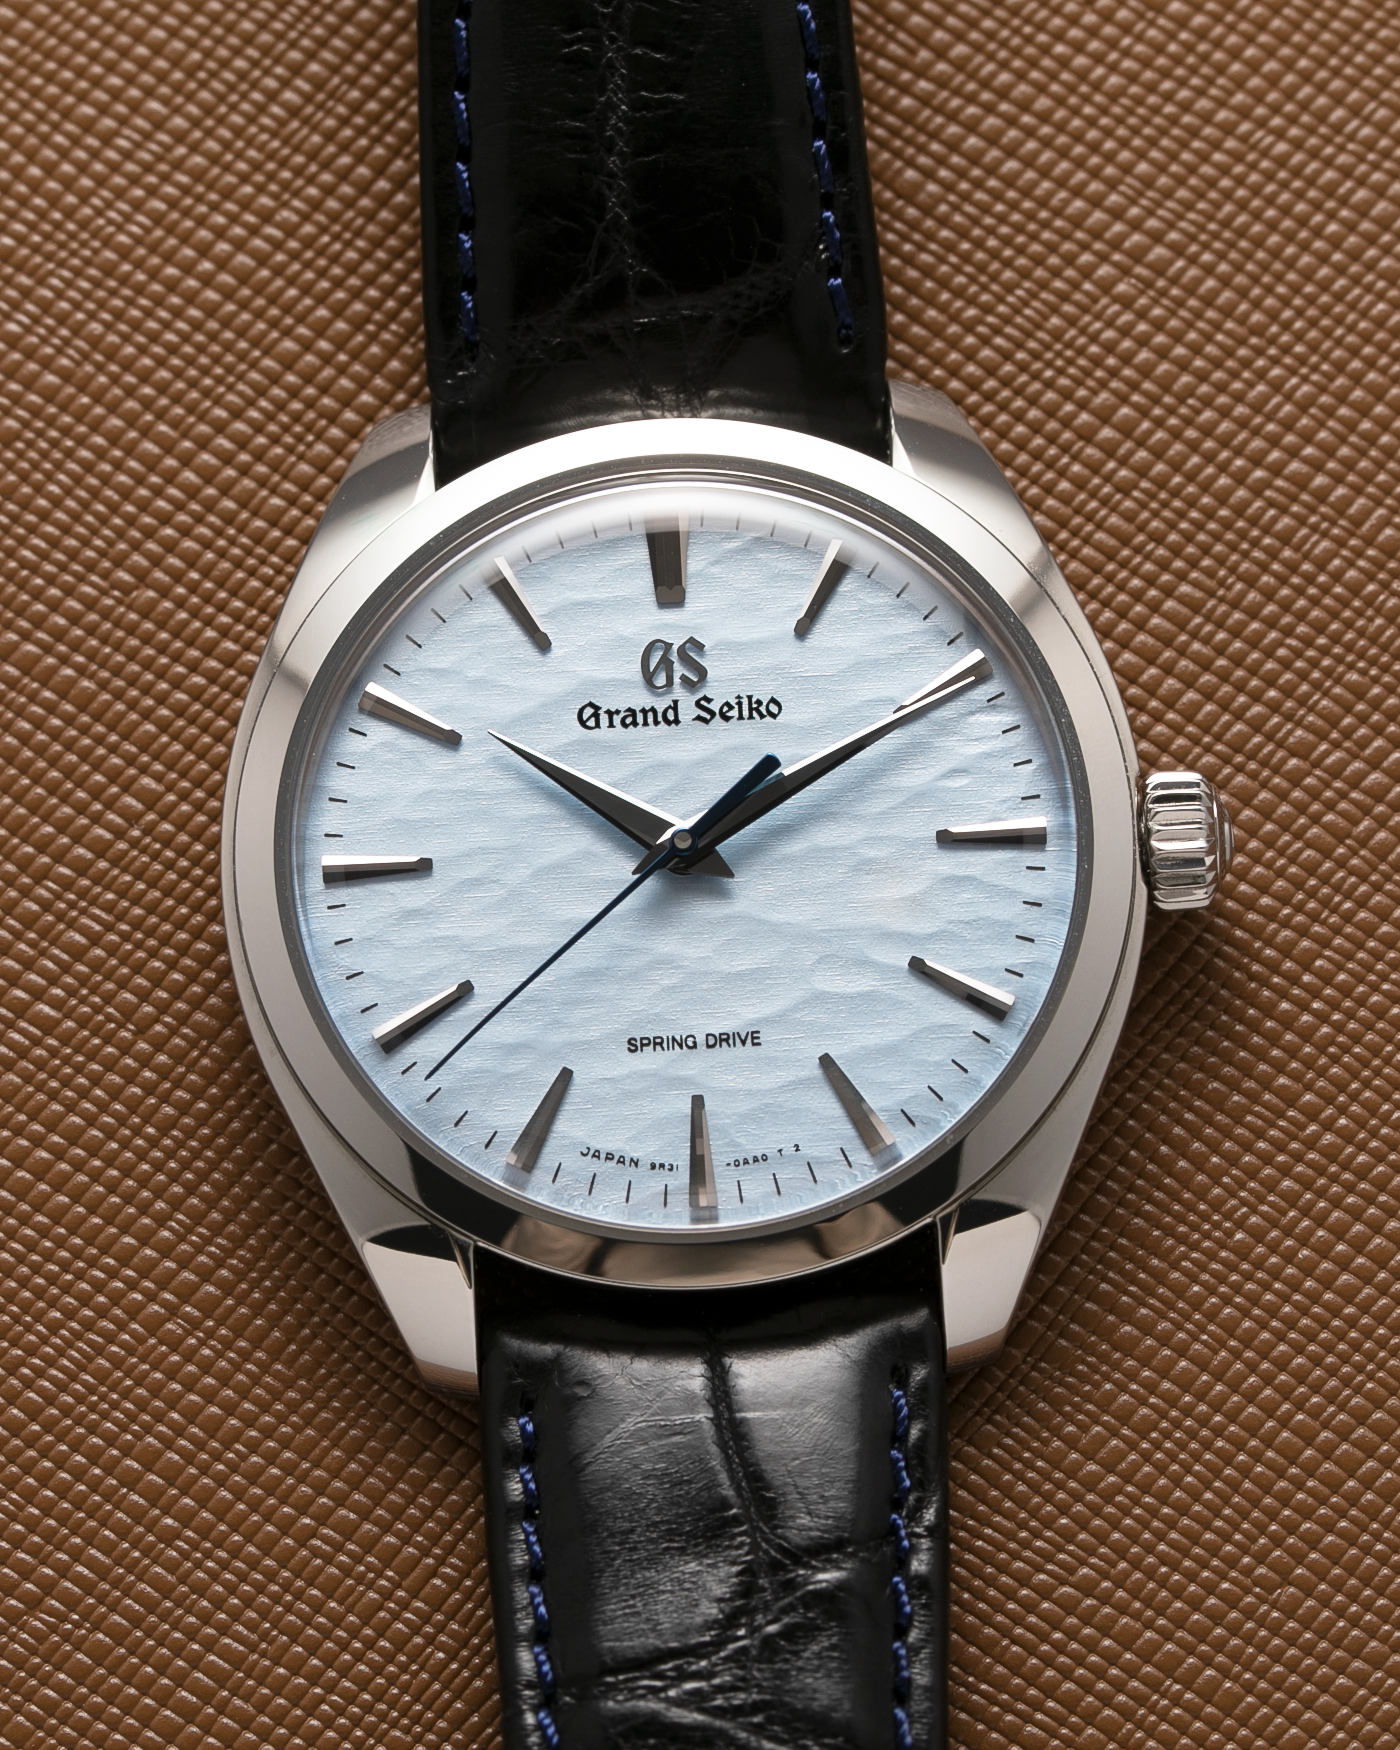 Brand: Grand Seiko Year: 2021 Reference Number: SBGY003 Spring Drive Material: Stainless Steel Movement: Cal 9R31 Case Diameter: 38.5mm Strap: Grand Seiko Black Crocodile Strap with Blue Stitching and Stainless Steel Deployant